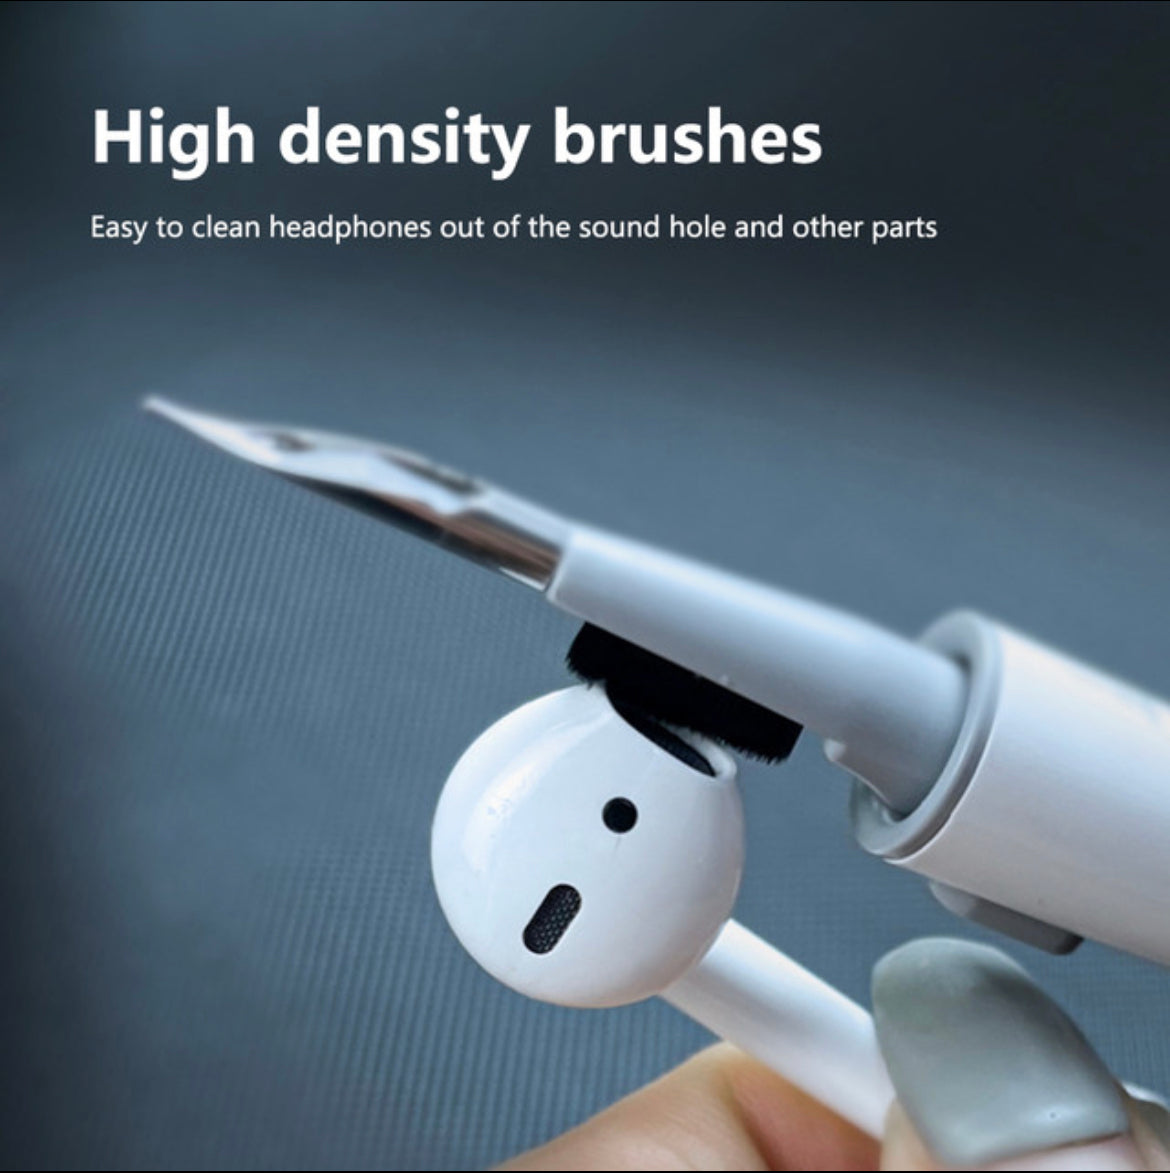 AirPods Cleaner